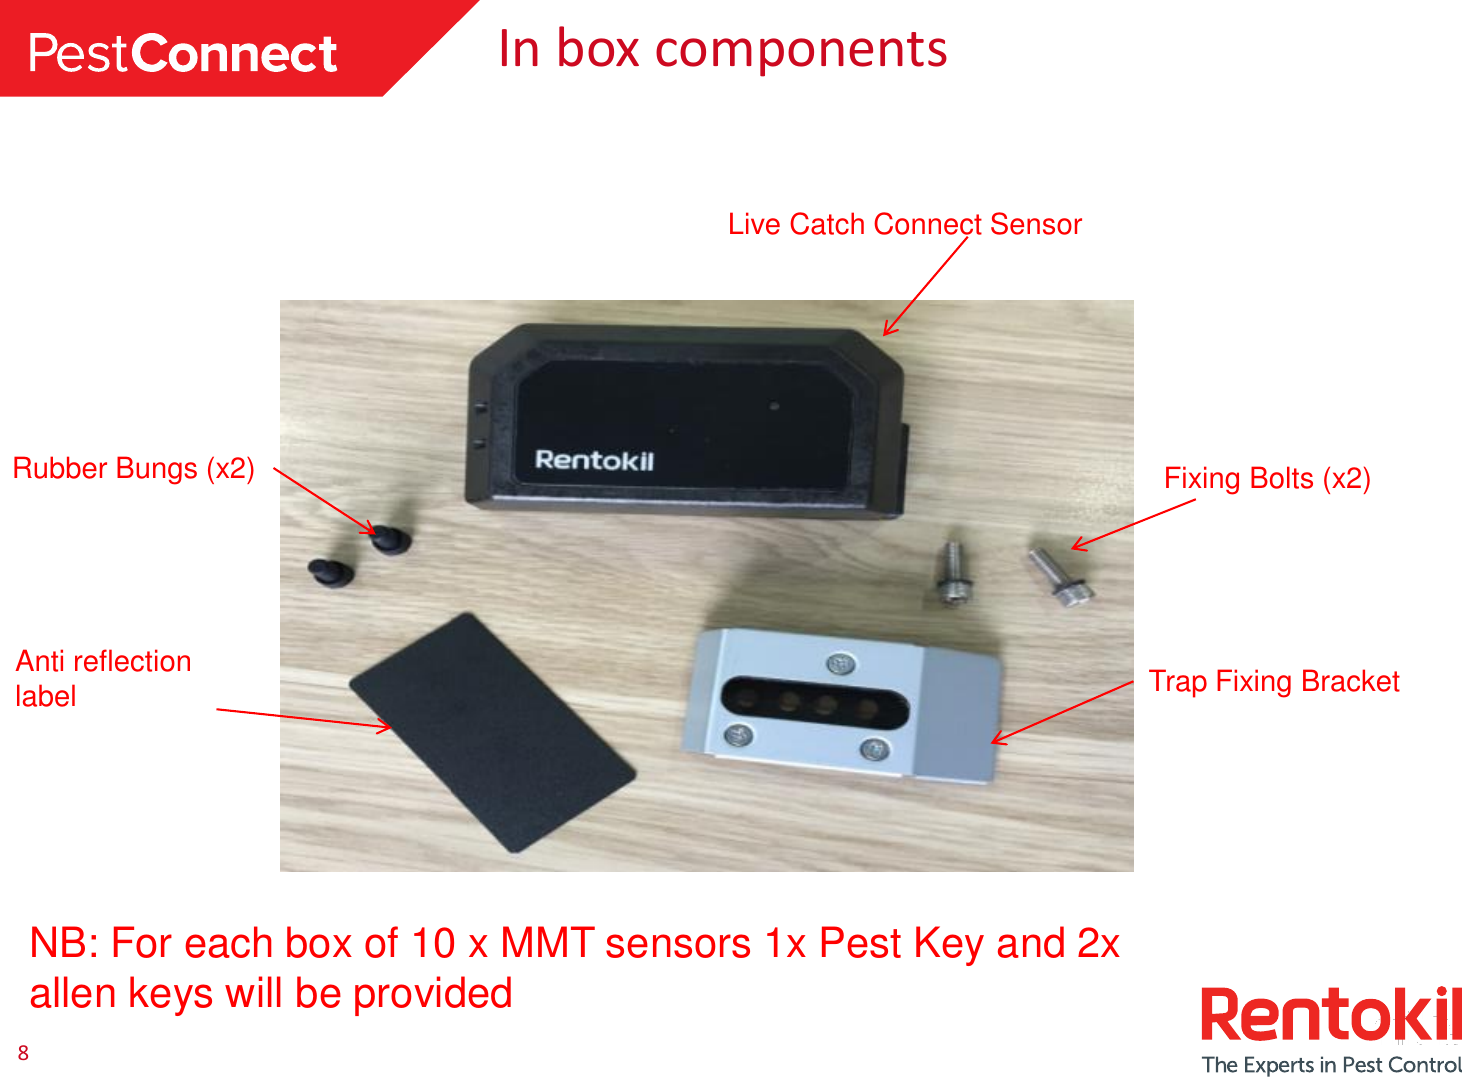 8In box componentsLive Catch Connect SensorAnti reflection labelRubber Bungs (x2) Fixing Bolts (x2)NB: For each box of 10 x MMT sensors 1x Pest Key and 2x allen keys will be providedTrap Fixing Bracket